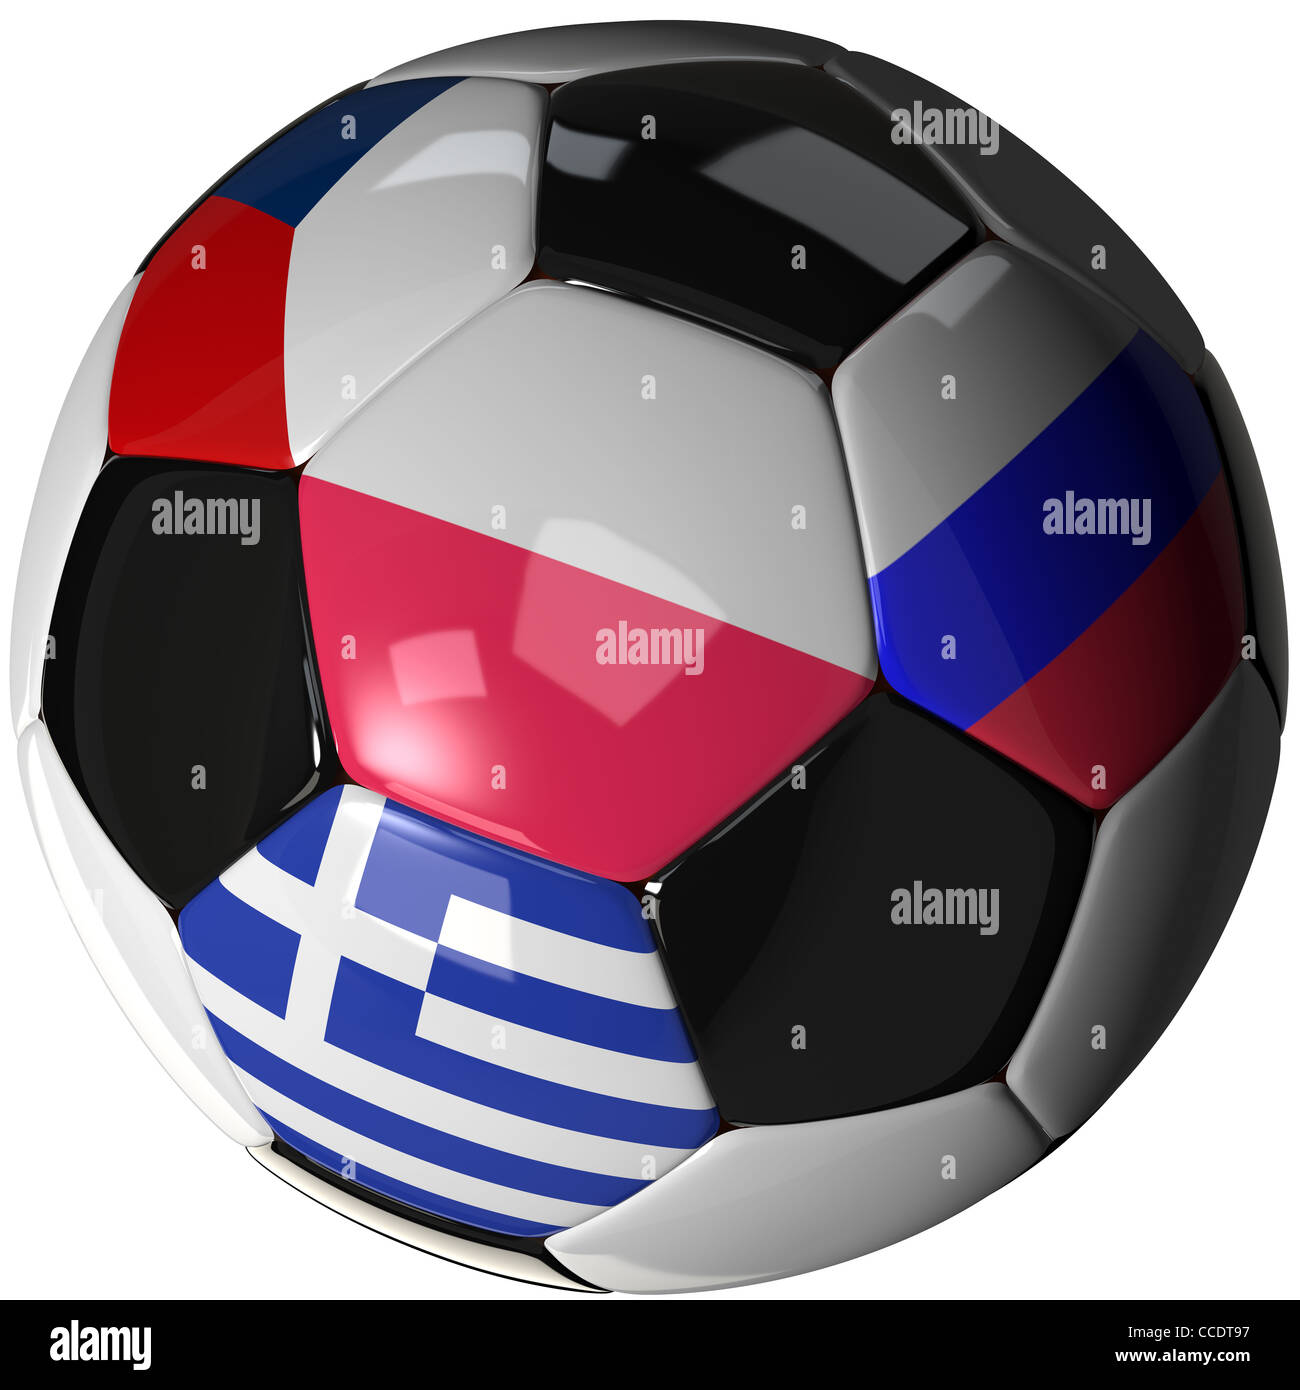 Soccer ball with the four flags of the competing teams in group A of the 2012 European Soccer Championship Stock Photo